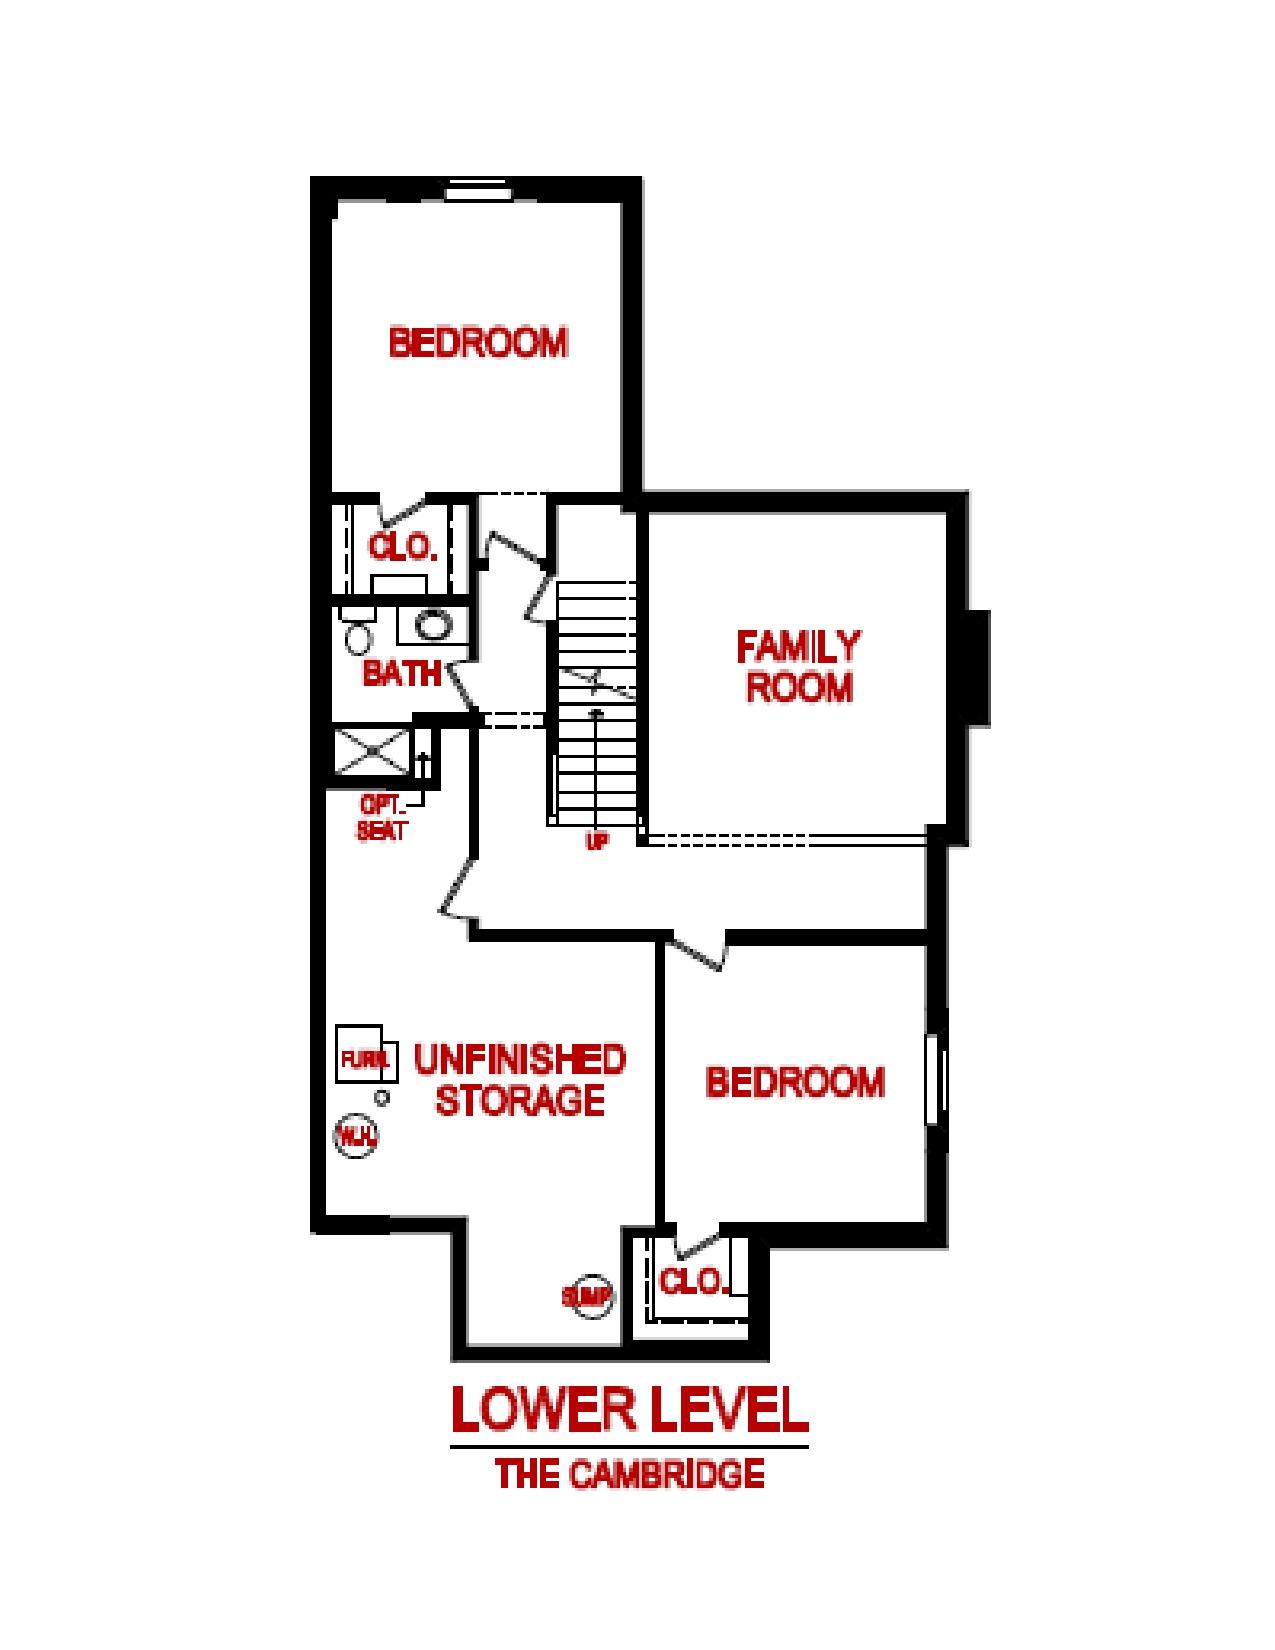 Lower level floor plan of a cambridge model from lambie custom homes